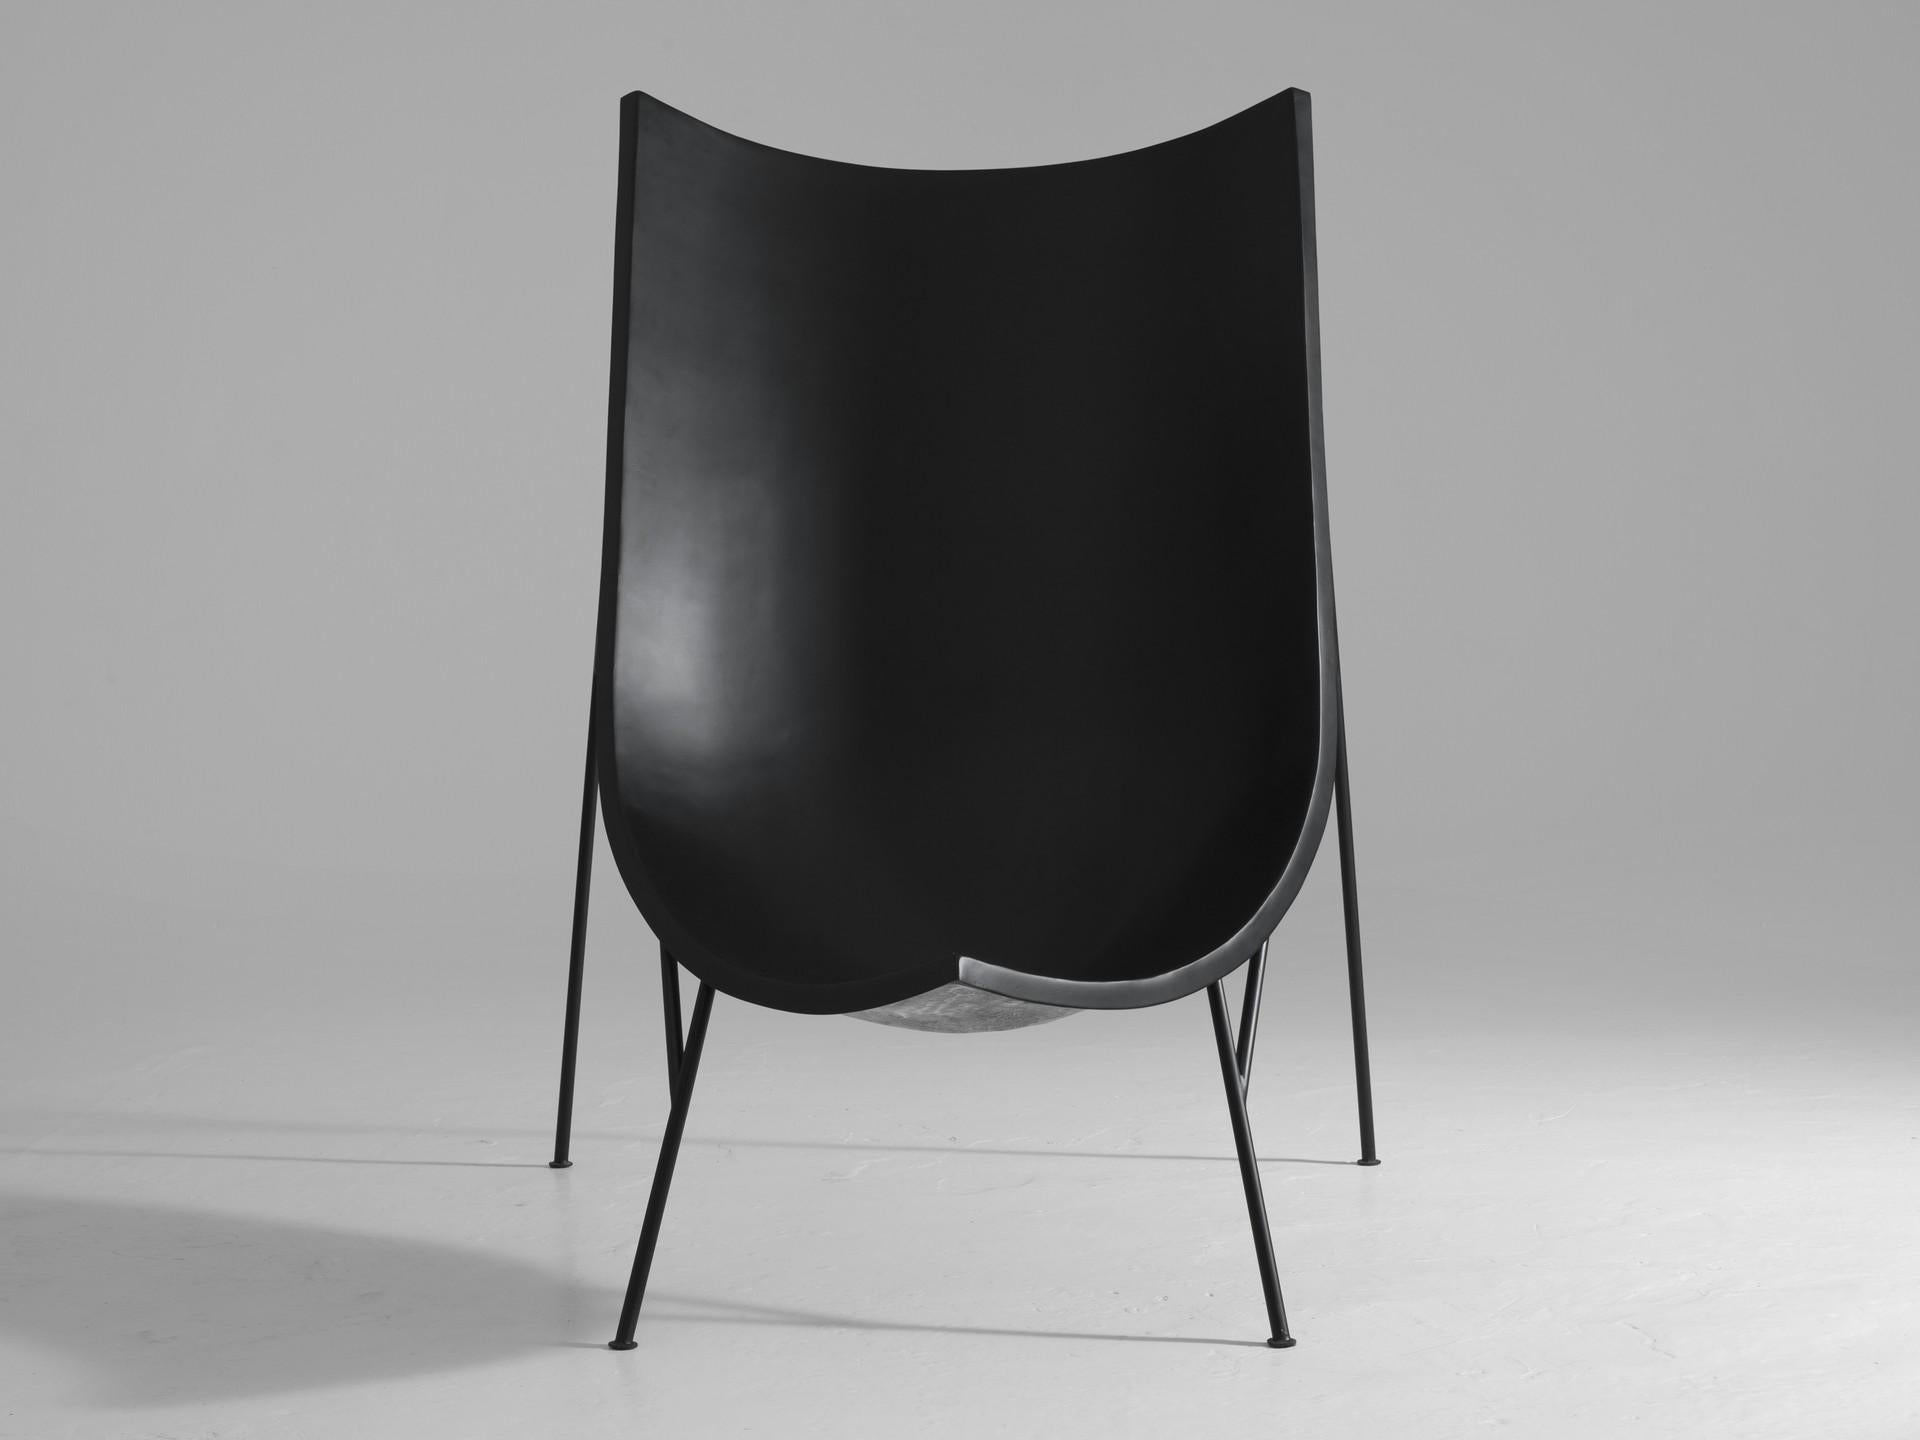 Ombra by Imperfettolab
2016
Designer: Verter Turroni
Dimensions: W 118 x D 135 x H 152 cm 
Materials: Varnished Fibreglass, Metal Base 

Armchair in varnished or upholstered fibreglass, metal base

Imperfetto Lab
Who we are ? We are a